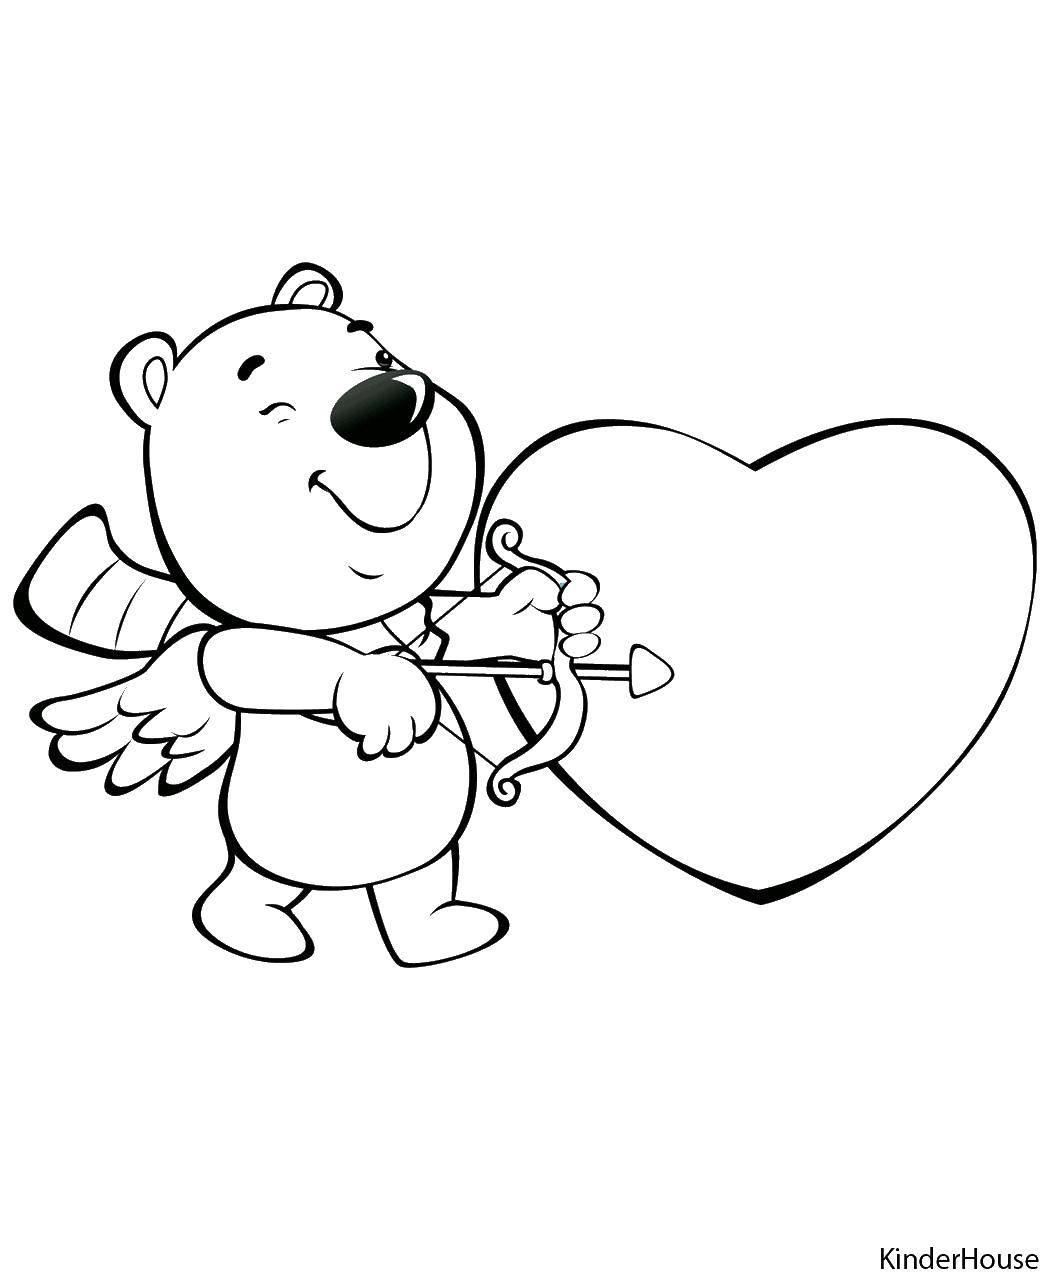 Coloring Bear Cupid. Category Valentines day. Tags:  Valentines day, love, Cupid.